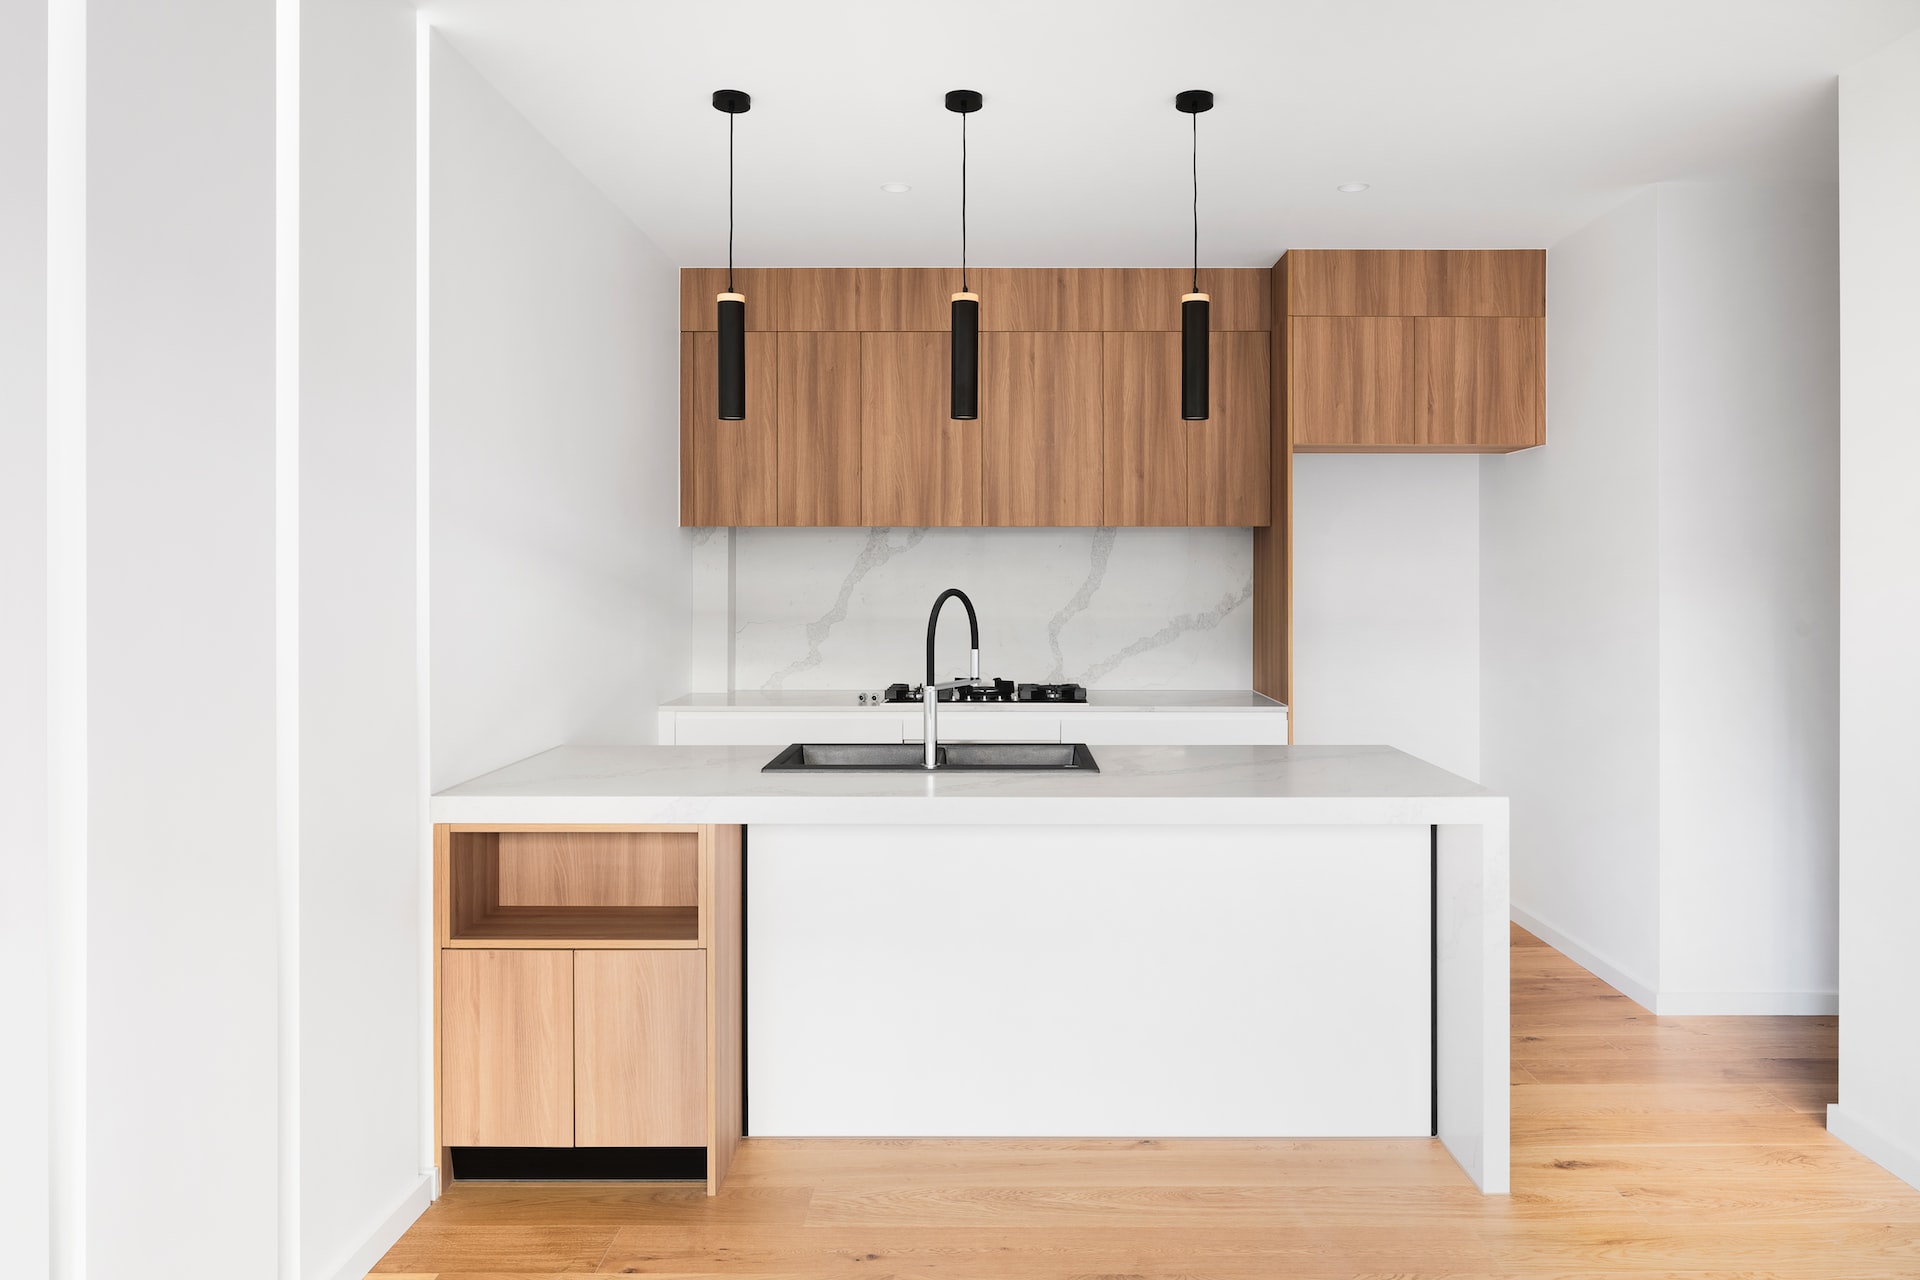 https://universalkitchenwraps.co.uk/wp-content/uploads/2023/01/small-white-kitchen-vinyl-wrapped-with-wood-finish-in-coventry.jpg